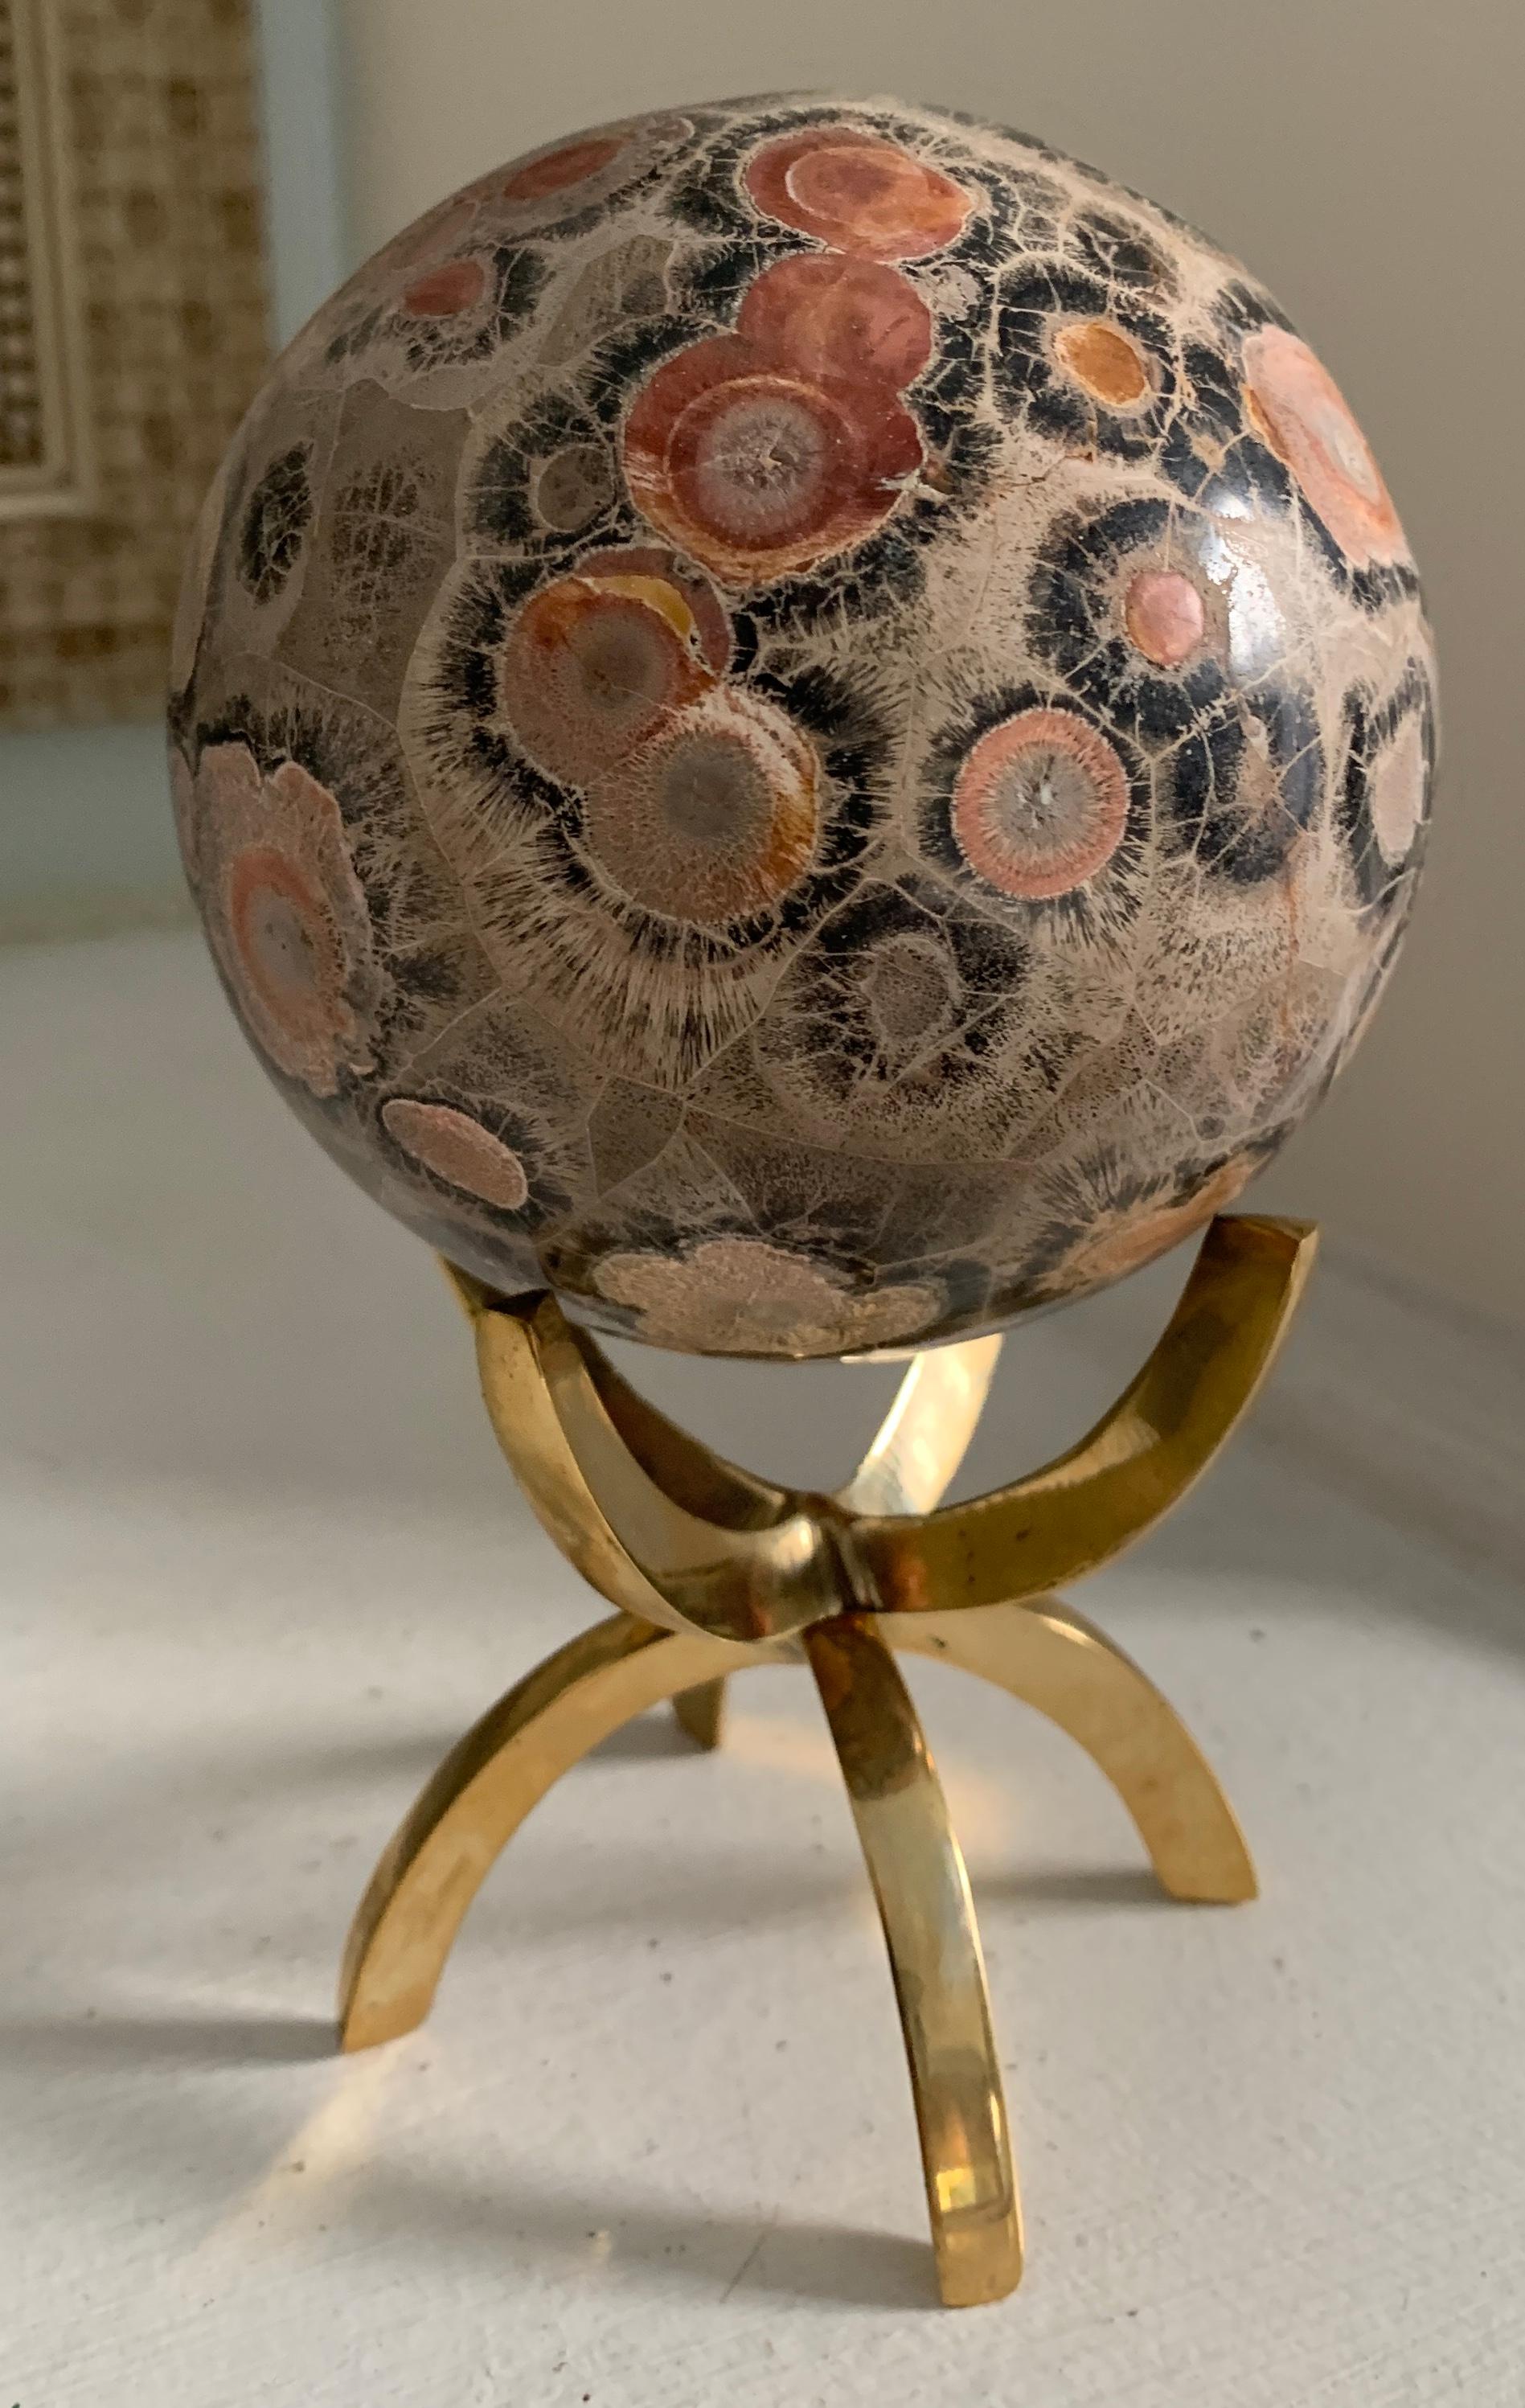 A wonderful specimen on a four pronged brass stand. A wonderful decorative object for any shelf or desk and well suited as a paperweight on the most sophisticated of desks.